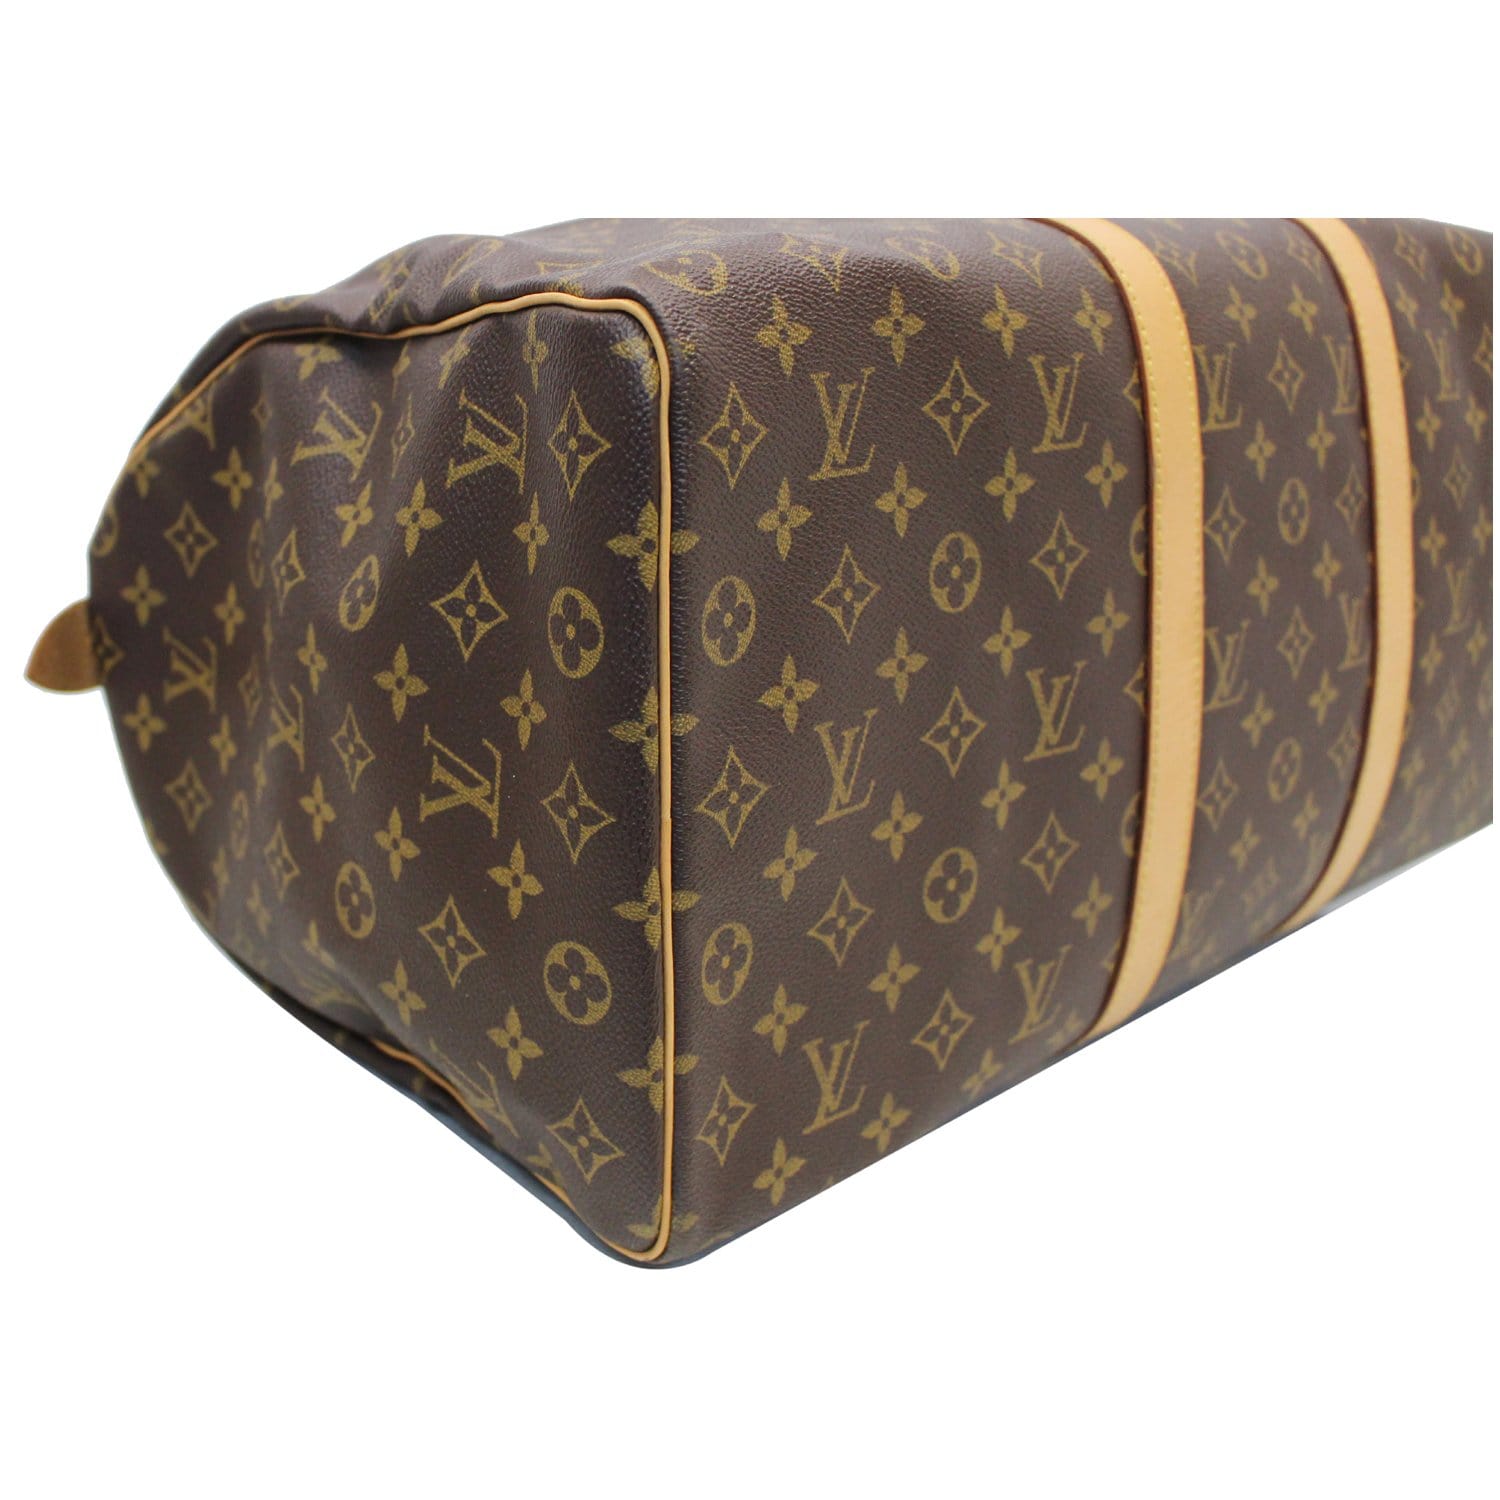 Authentic LV Keepall 50: Discounted 213341/1